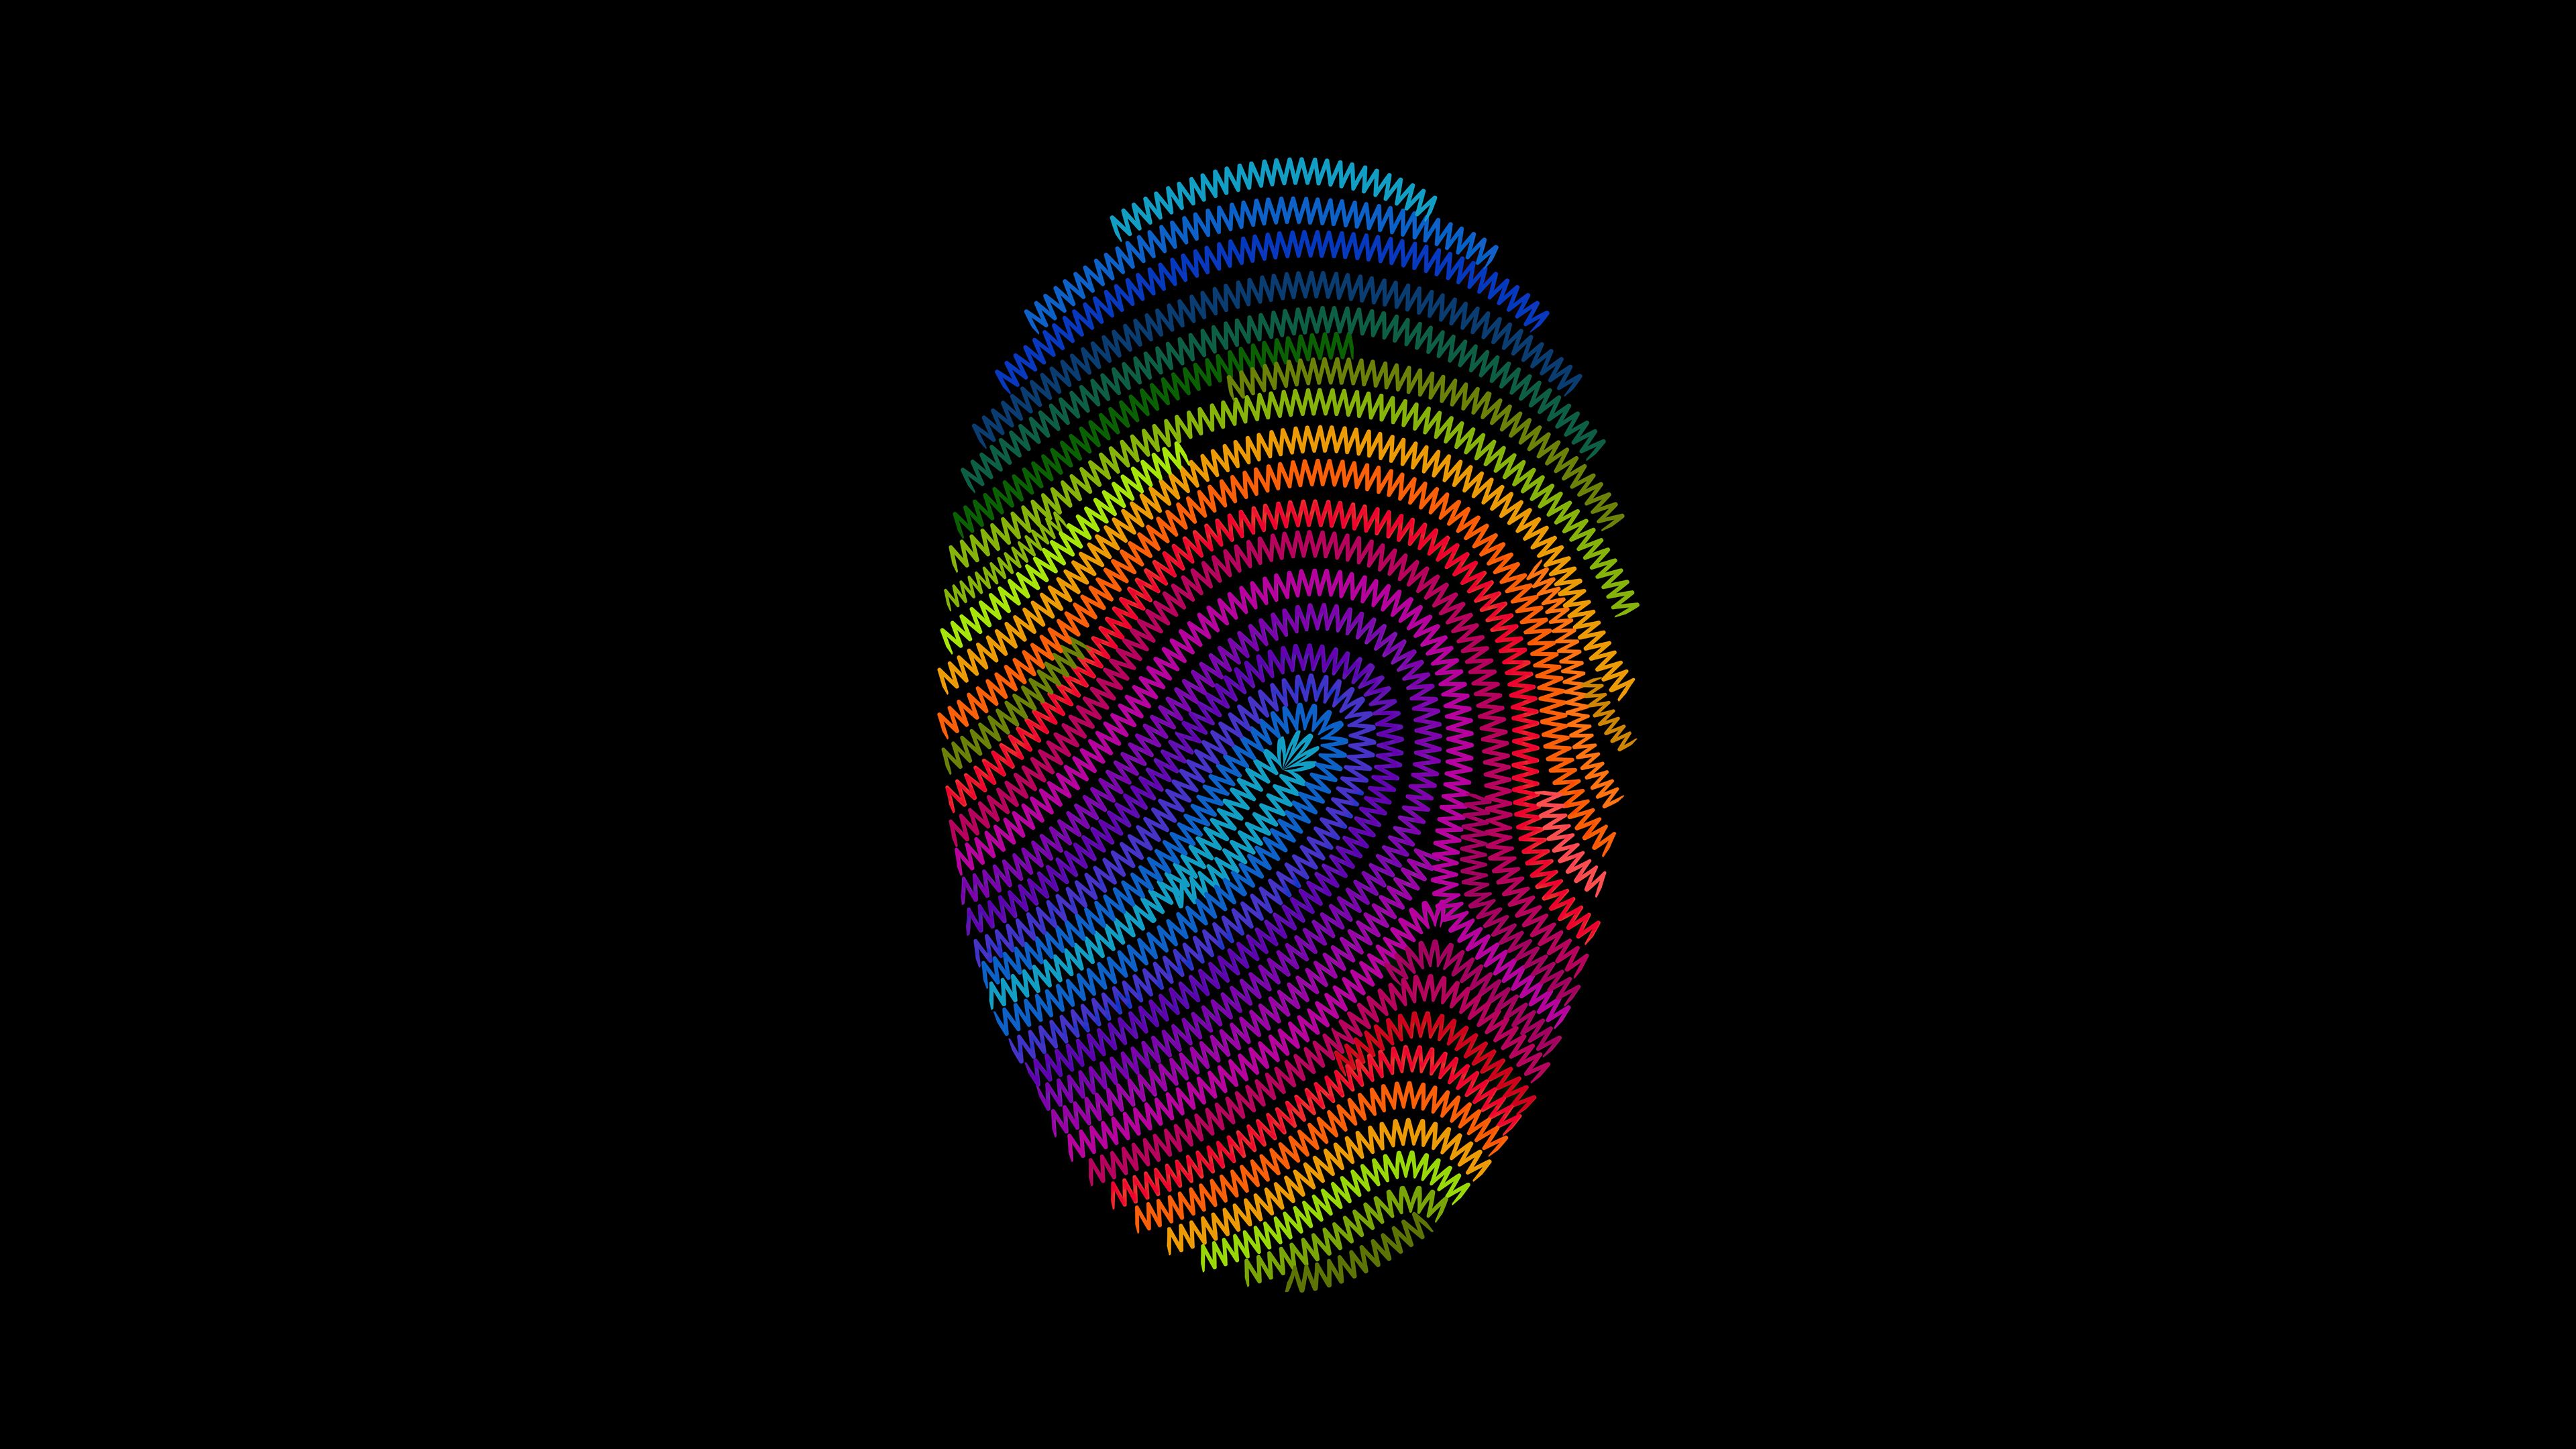 Thumbprint Oled Dark 4k, HD Artist, 4k Wallpaper, Image, Background, Photo and Picture